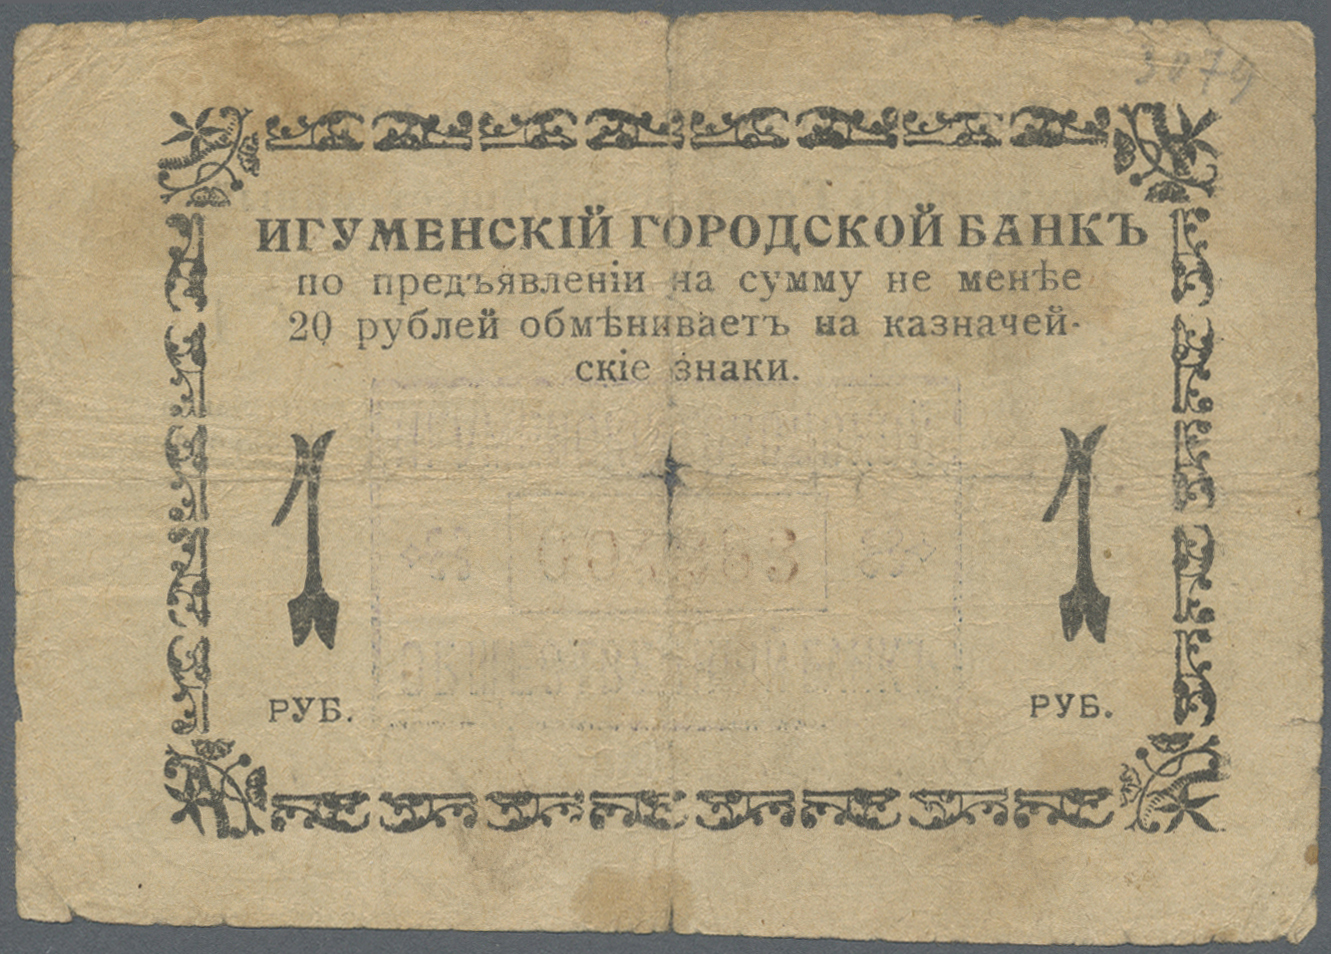 00257 Belarus: Igumen City Public Bank 1 Ruble 1918, P.NL (Istomin 300), Well Worn Condition With Several Folds, Stains - Belarus